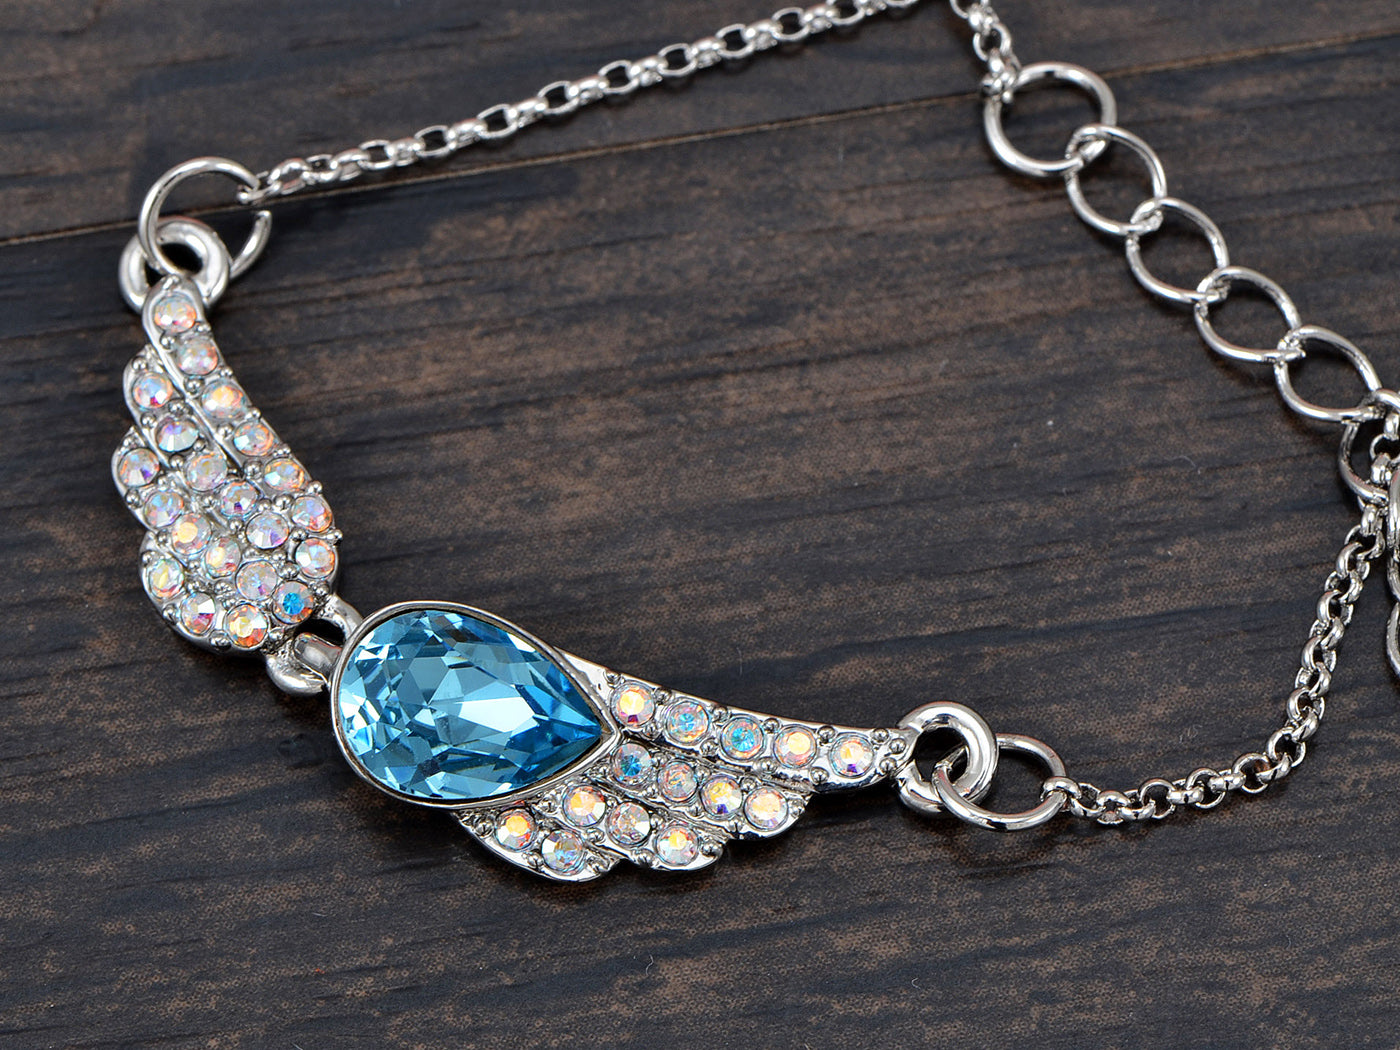 Dropship Swarovski Crystal Light Of Heaven Crystal Angel Pendant Necklace  Angle Wing Heart Necklace For Girls to Sell Online at a Lower Price | Doba